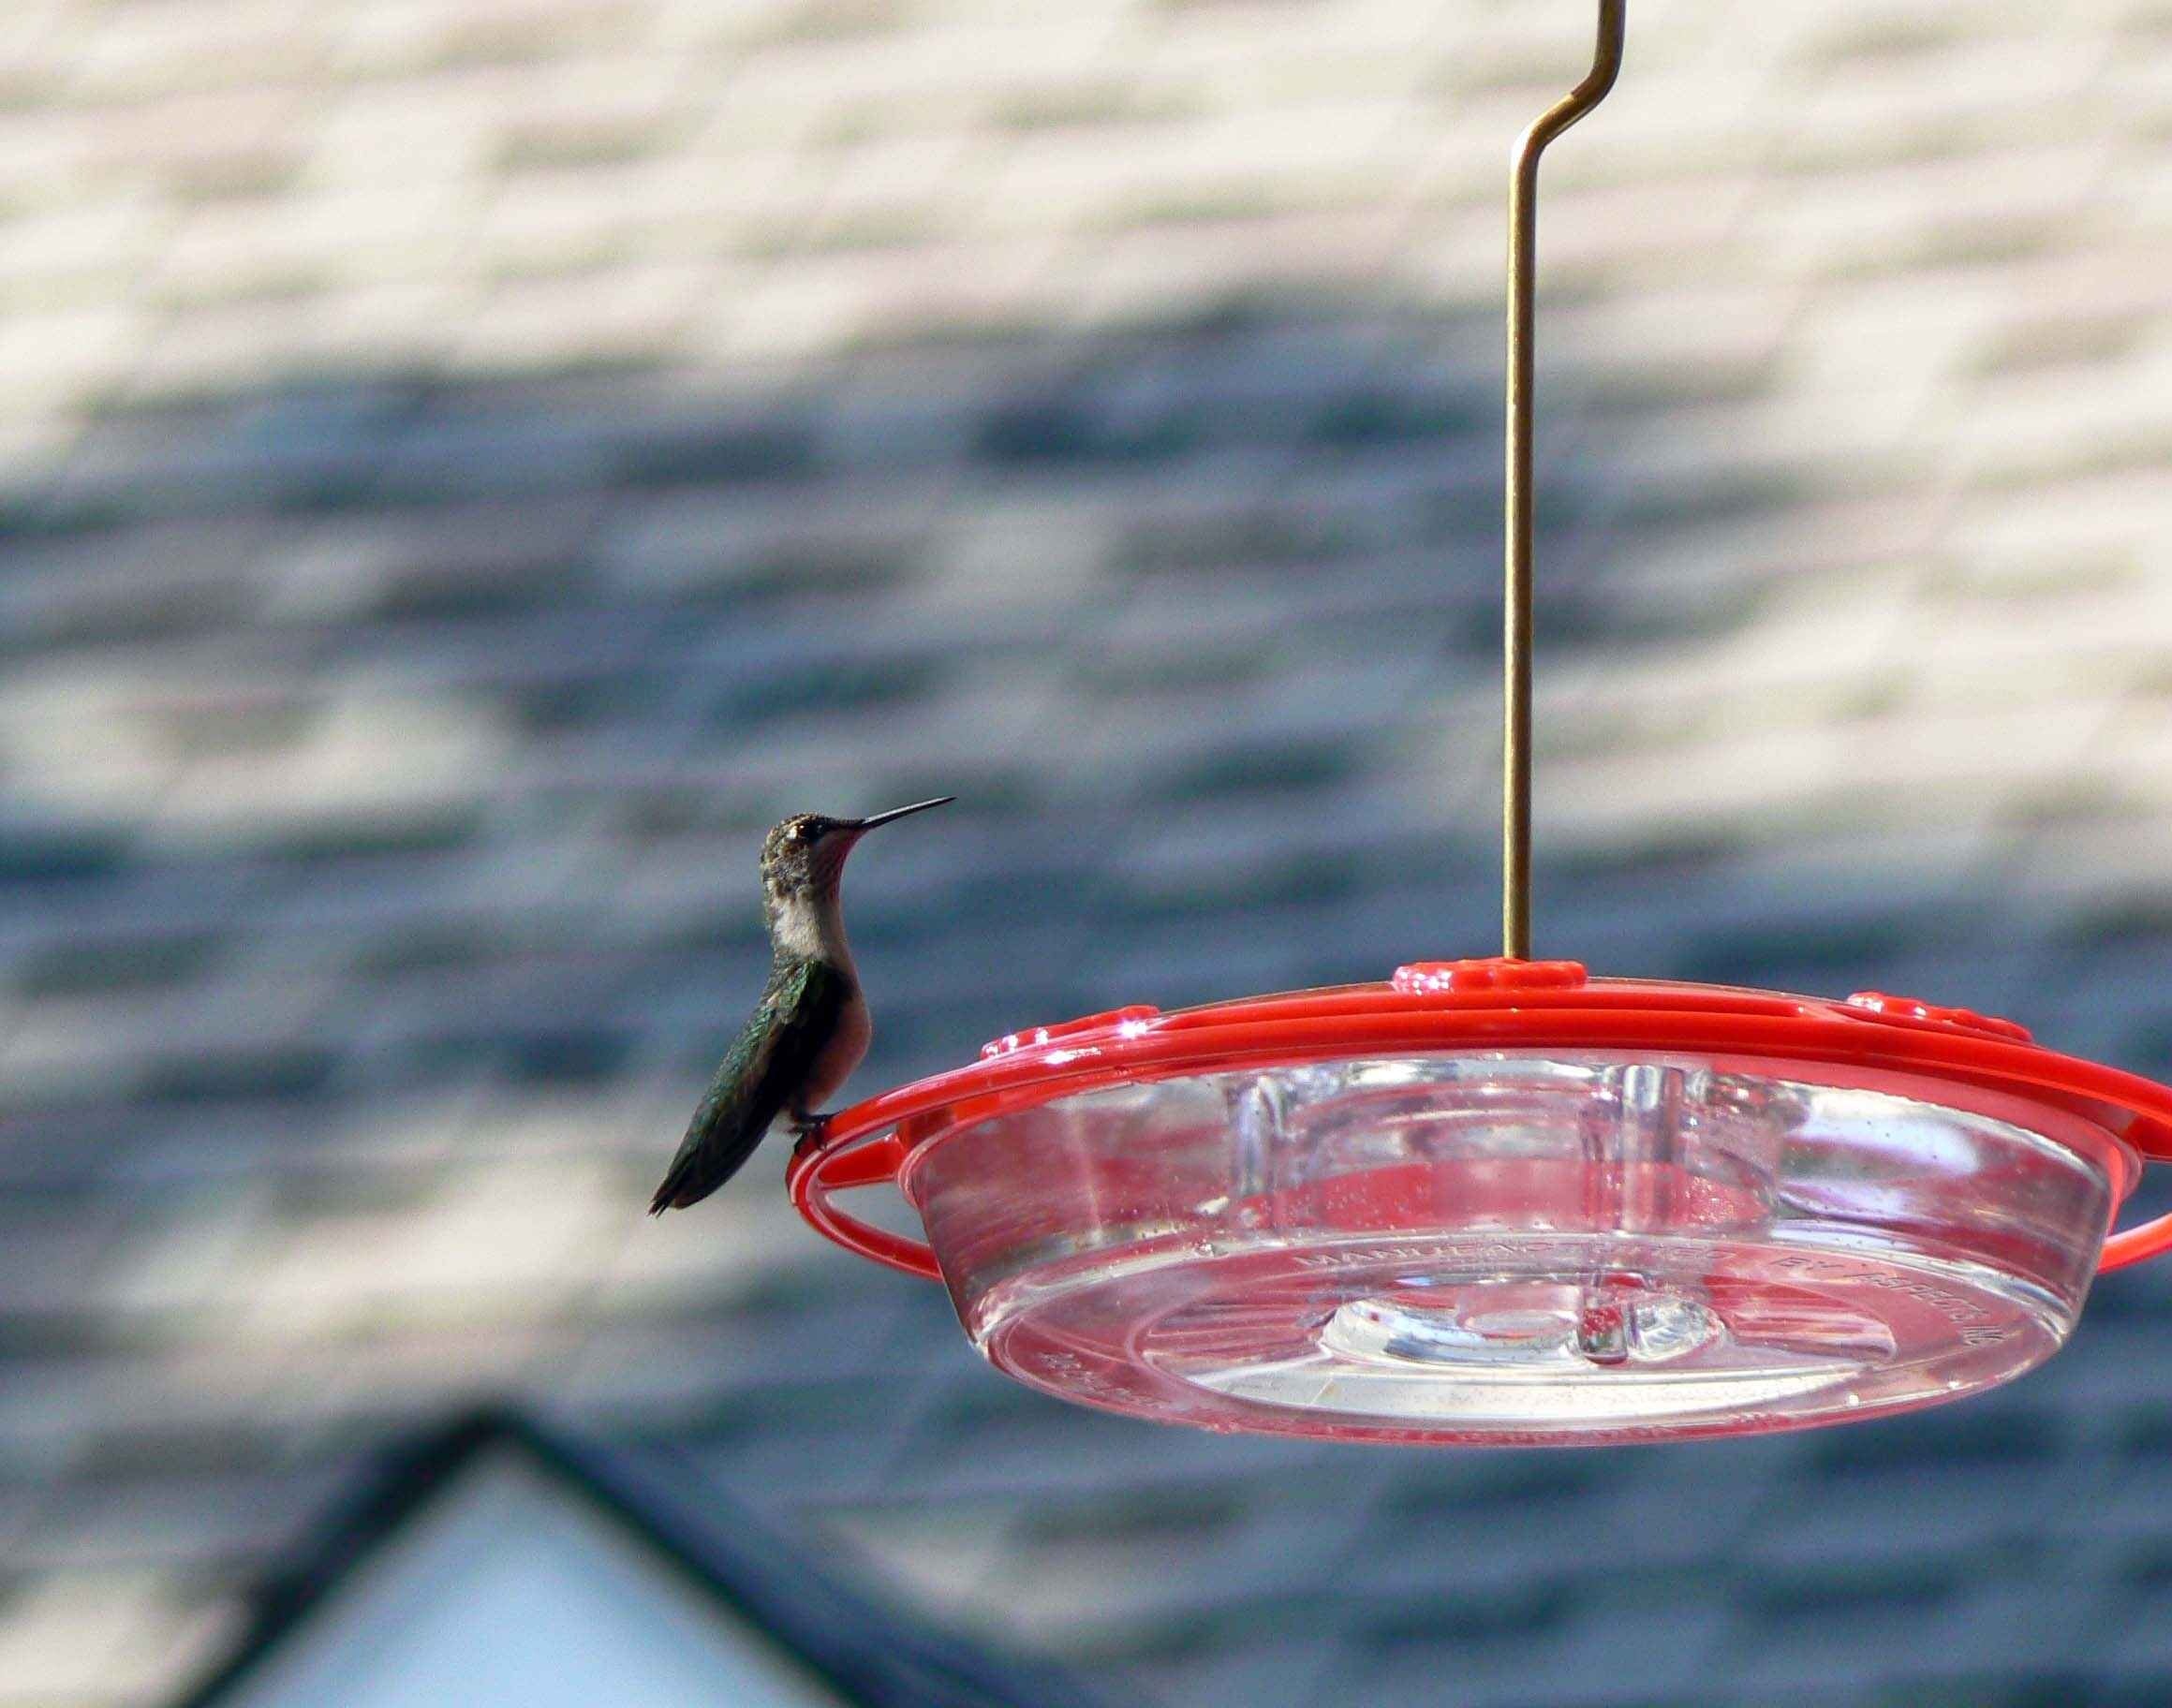 Feeder, Perched, Hummingbird, water, red